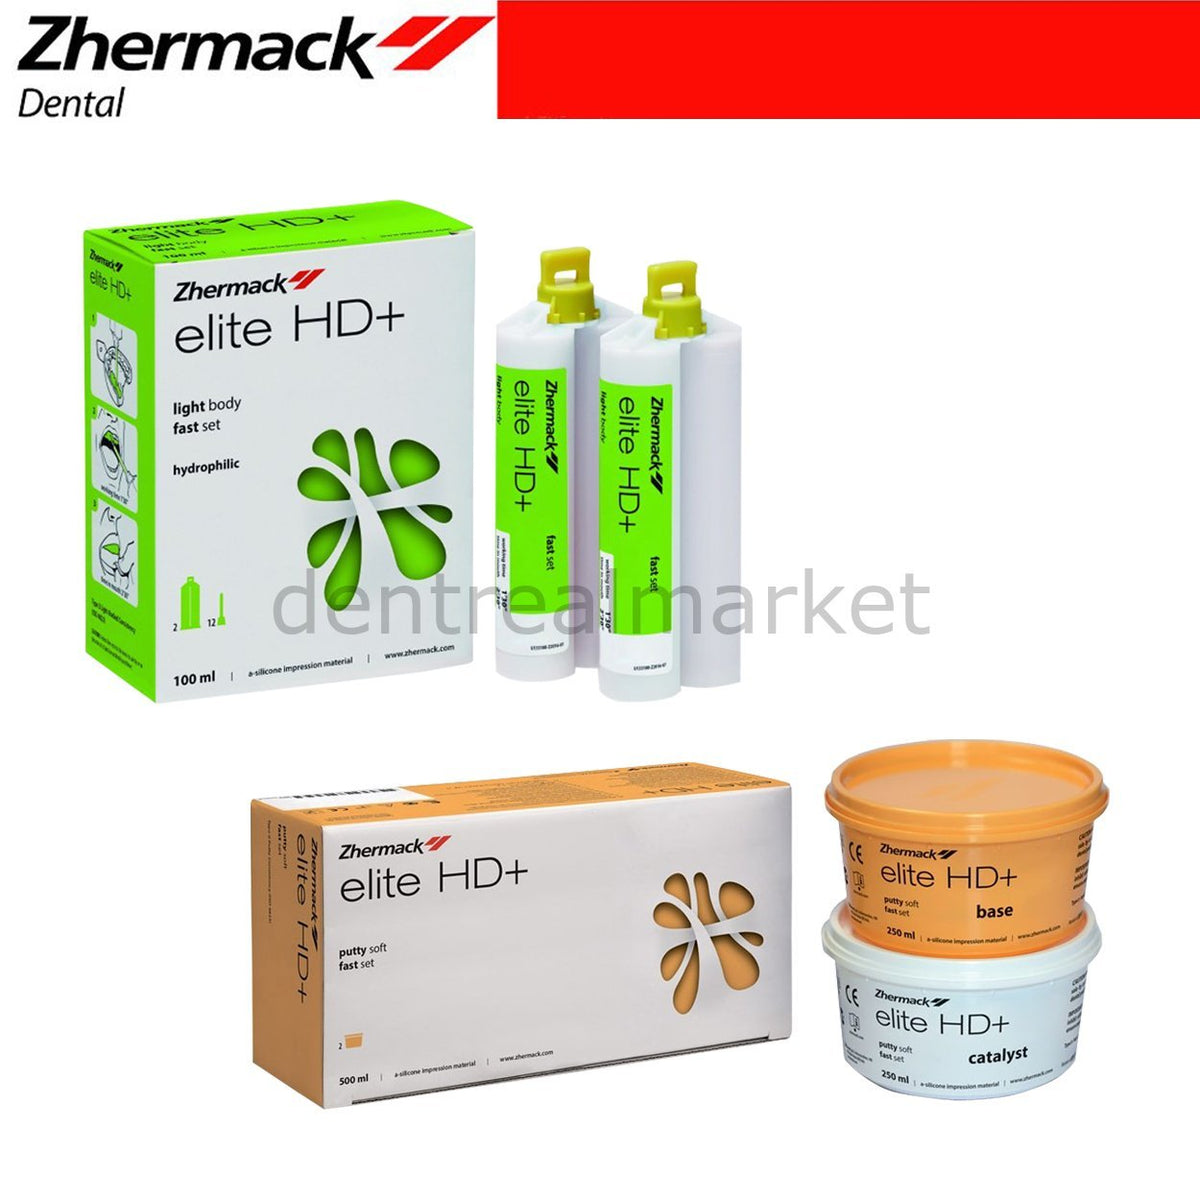 DentrealStore - Zhermack Elite Hd +A Silicone Impression Material Fast Set